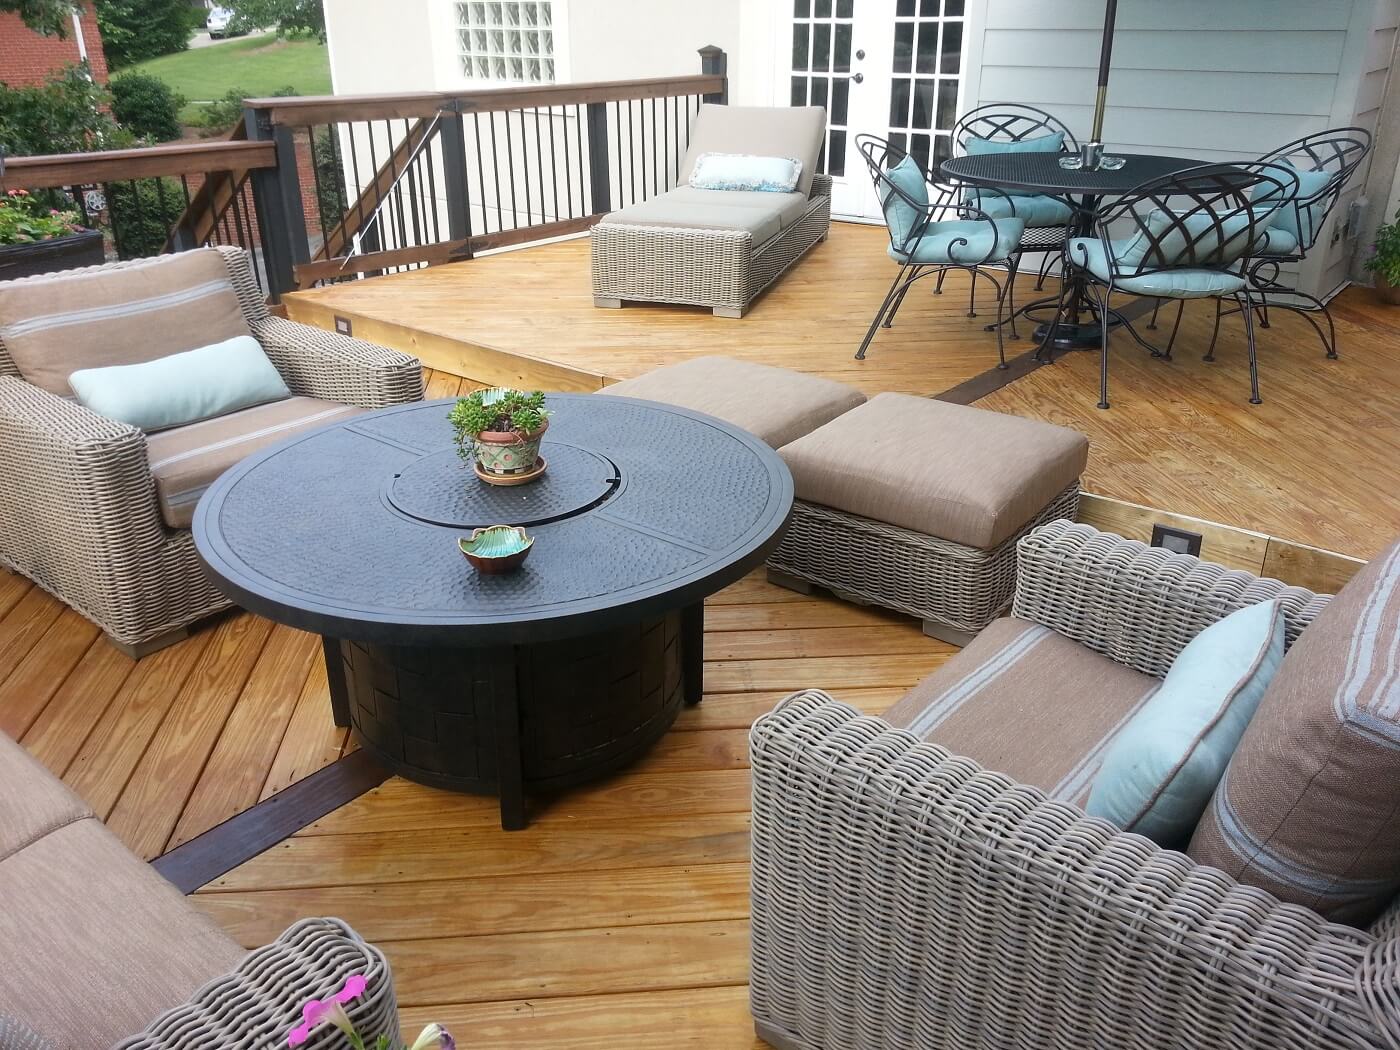 Custom wood deck with balusters and lounge area